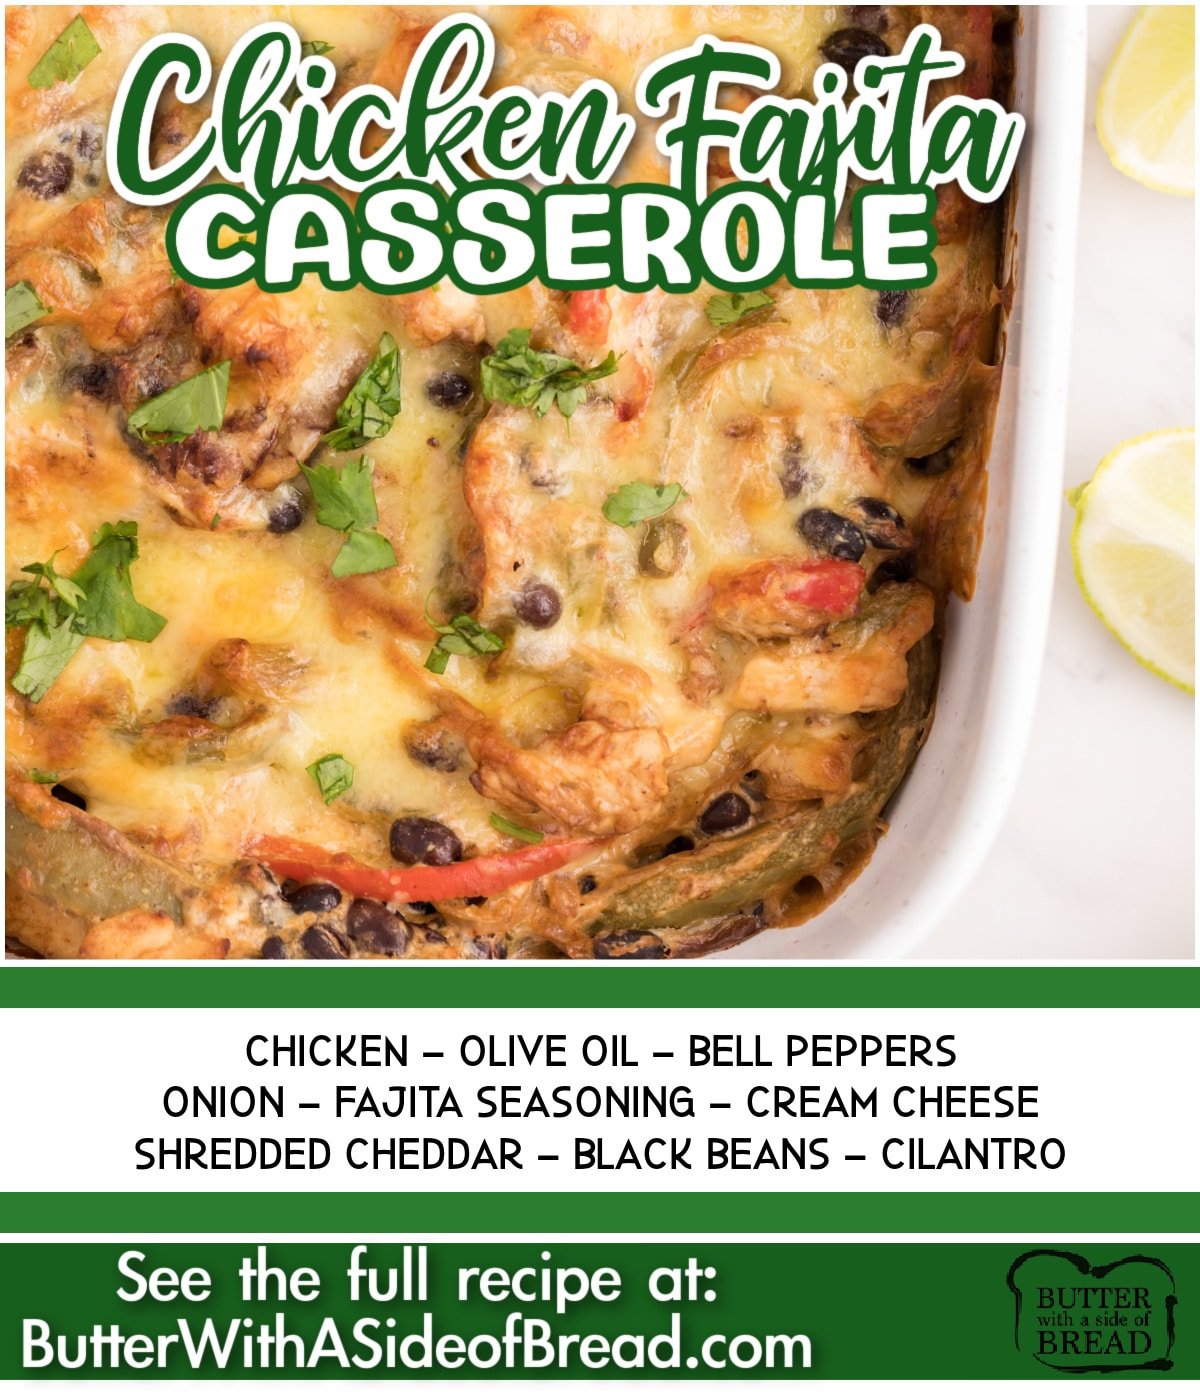 Chicken Fajita Casserole combines the flavors of chicken fajitas in a delicious casserole.  Chicken, peppers, onions and black beans are combined with a creamy cheese mixture before being baked to perfection.